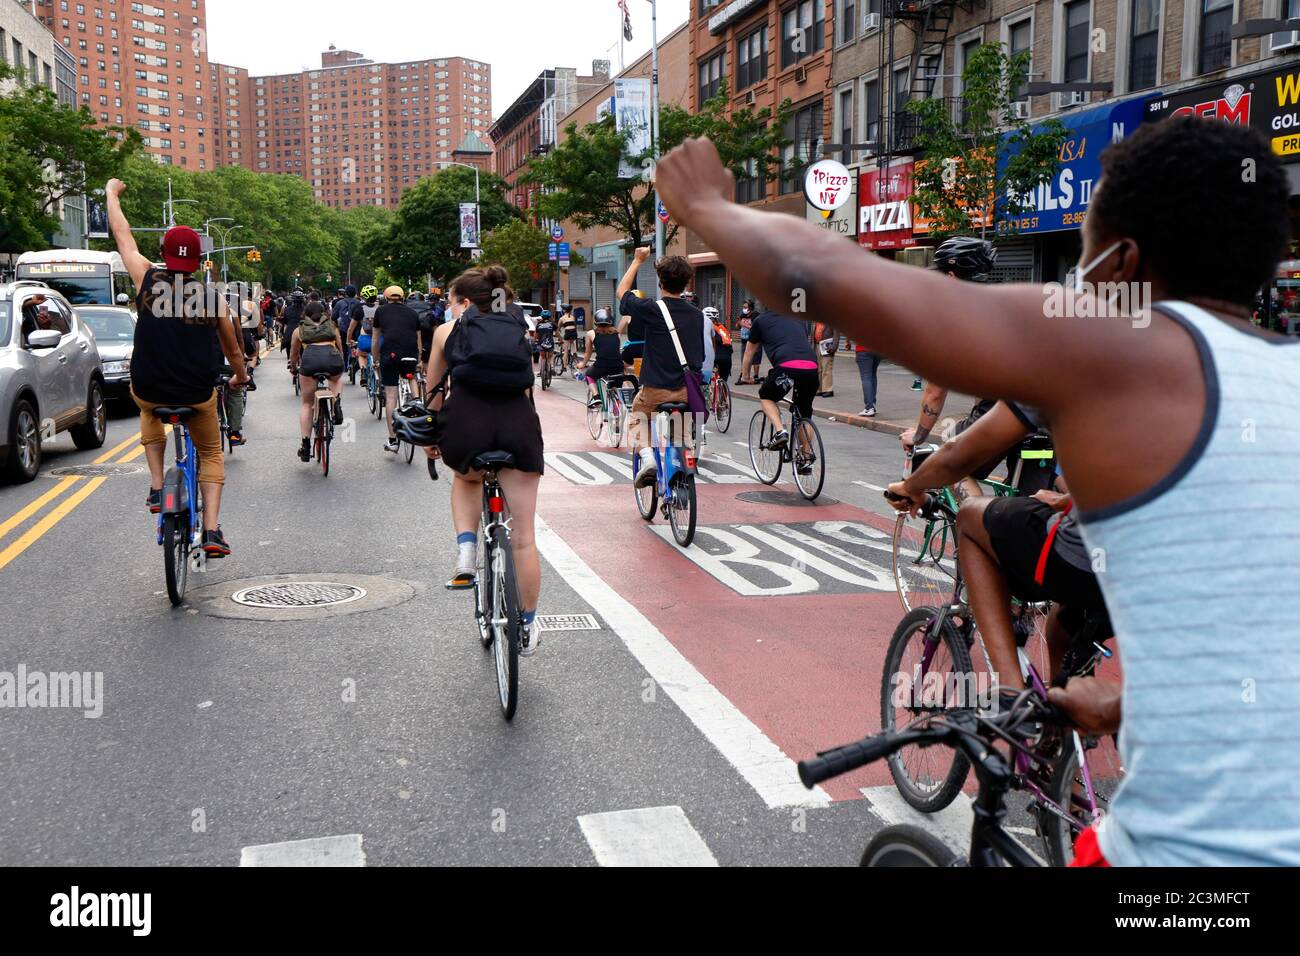 New York, NY. 20th June 2020. Bicyclists raise fists as they ride along  West 125th St. The bike protest was a Black Lives Matter solidarity ride  calling for justice in a recent